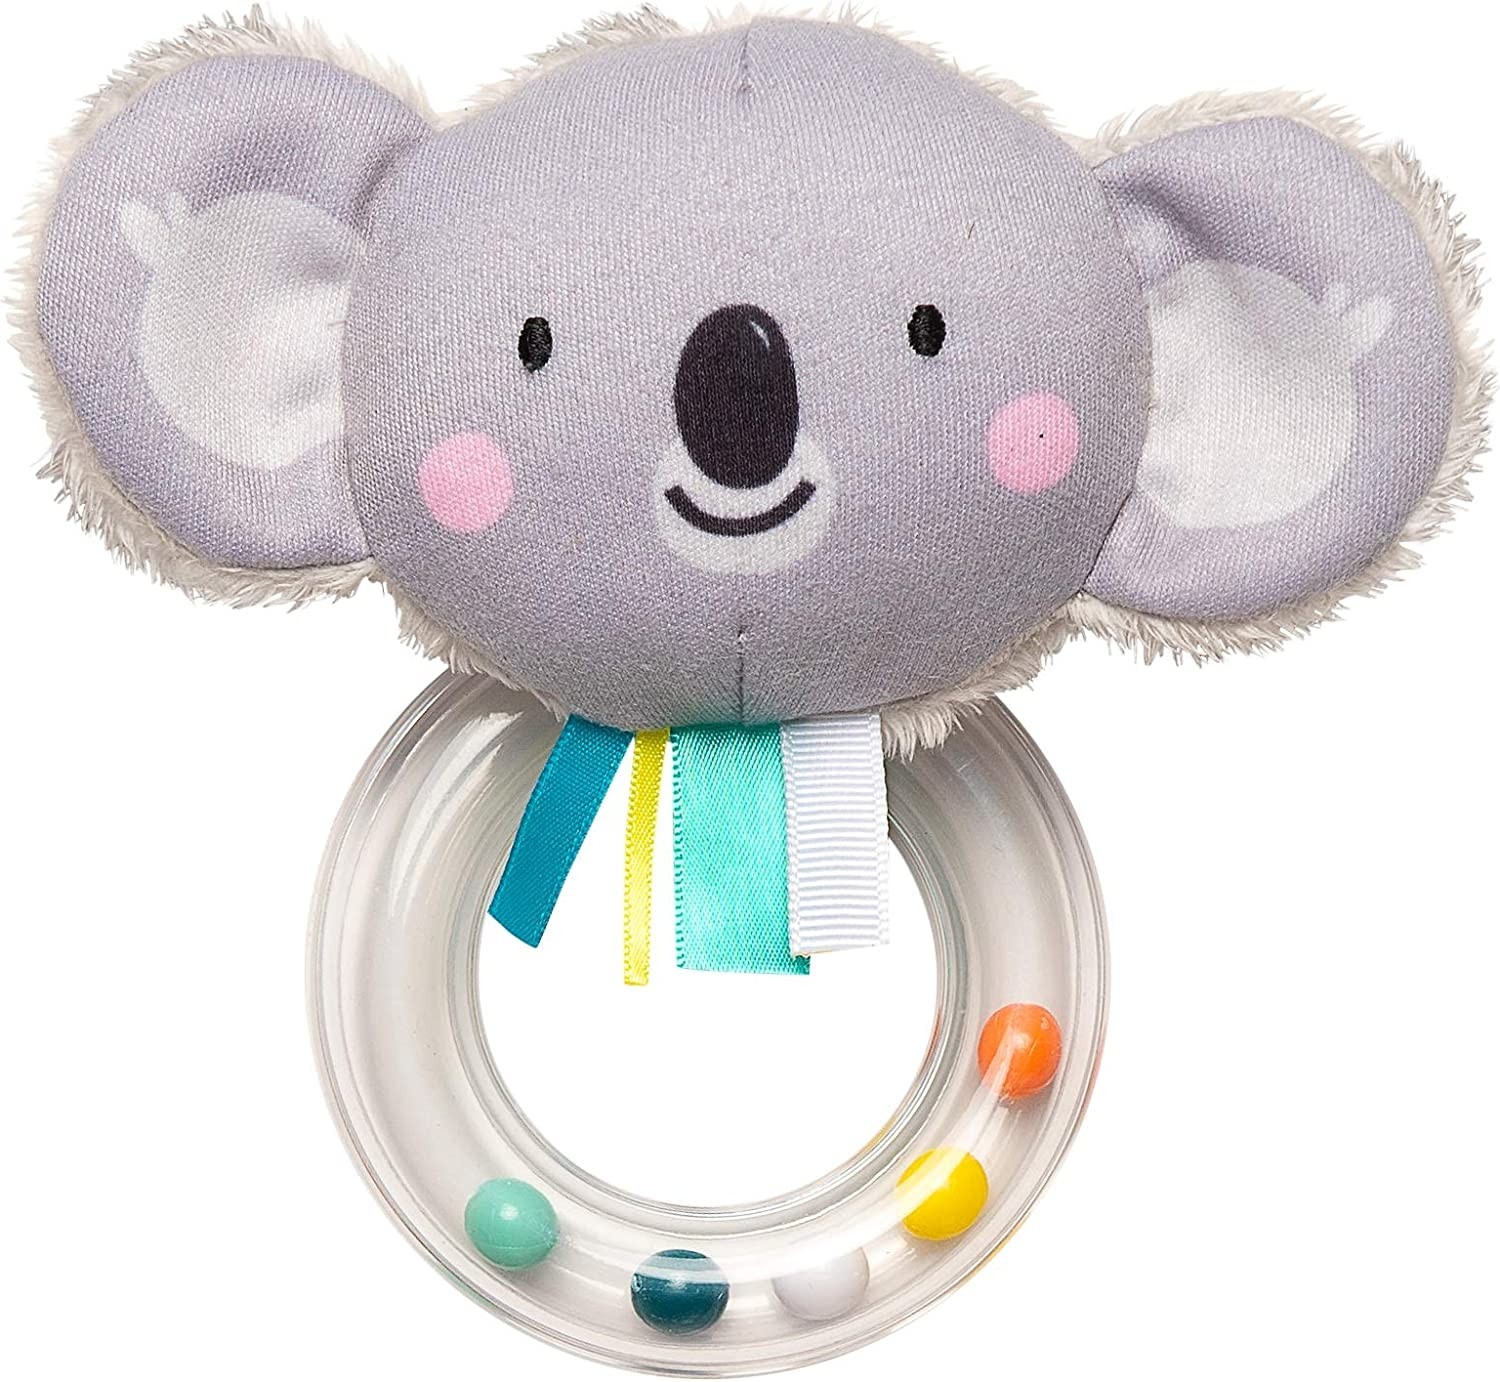 Taf Toys Kimmy Koala Newborn Baby Rattle. Soft Plush Toddler Sensory Ring Rattle with Ribbons and Crinkling Ears. Easy to Grab. Colourful Beads. Suitable for Boys & Girls from Birth